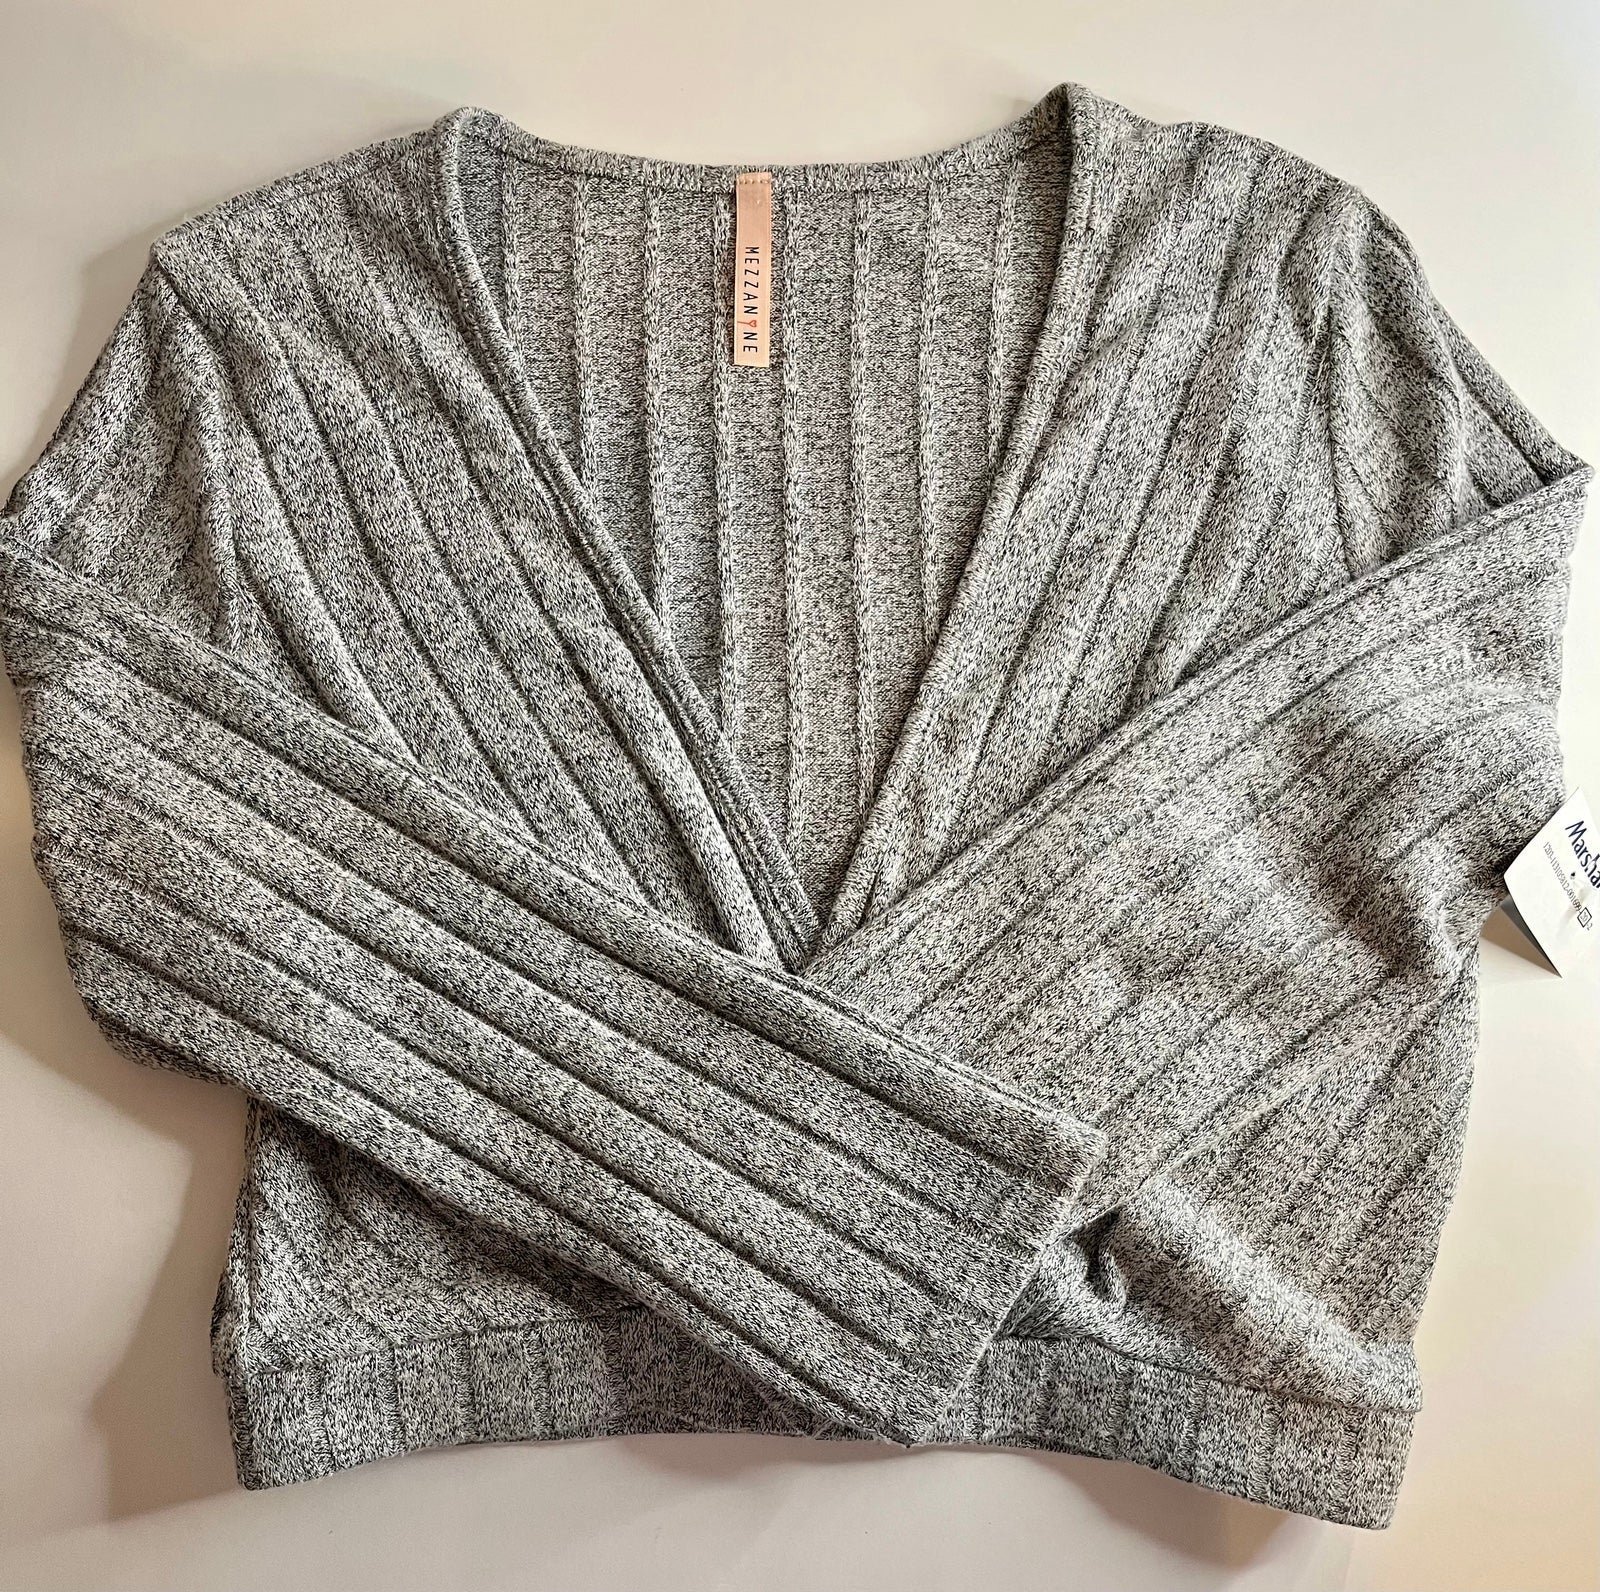 save up to 70% (NWT) MEZZANINE BOUTIQUE GRAY KNIT CROP 